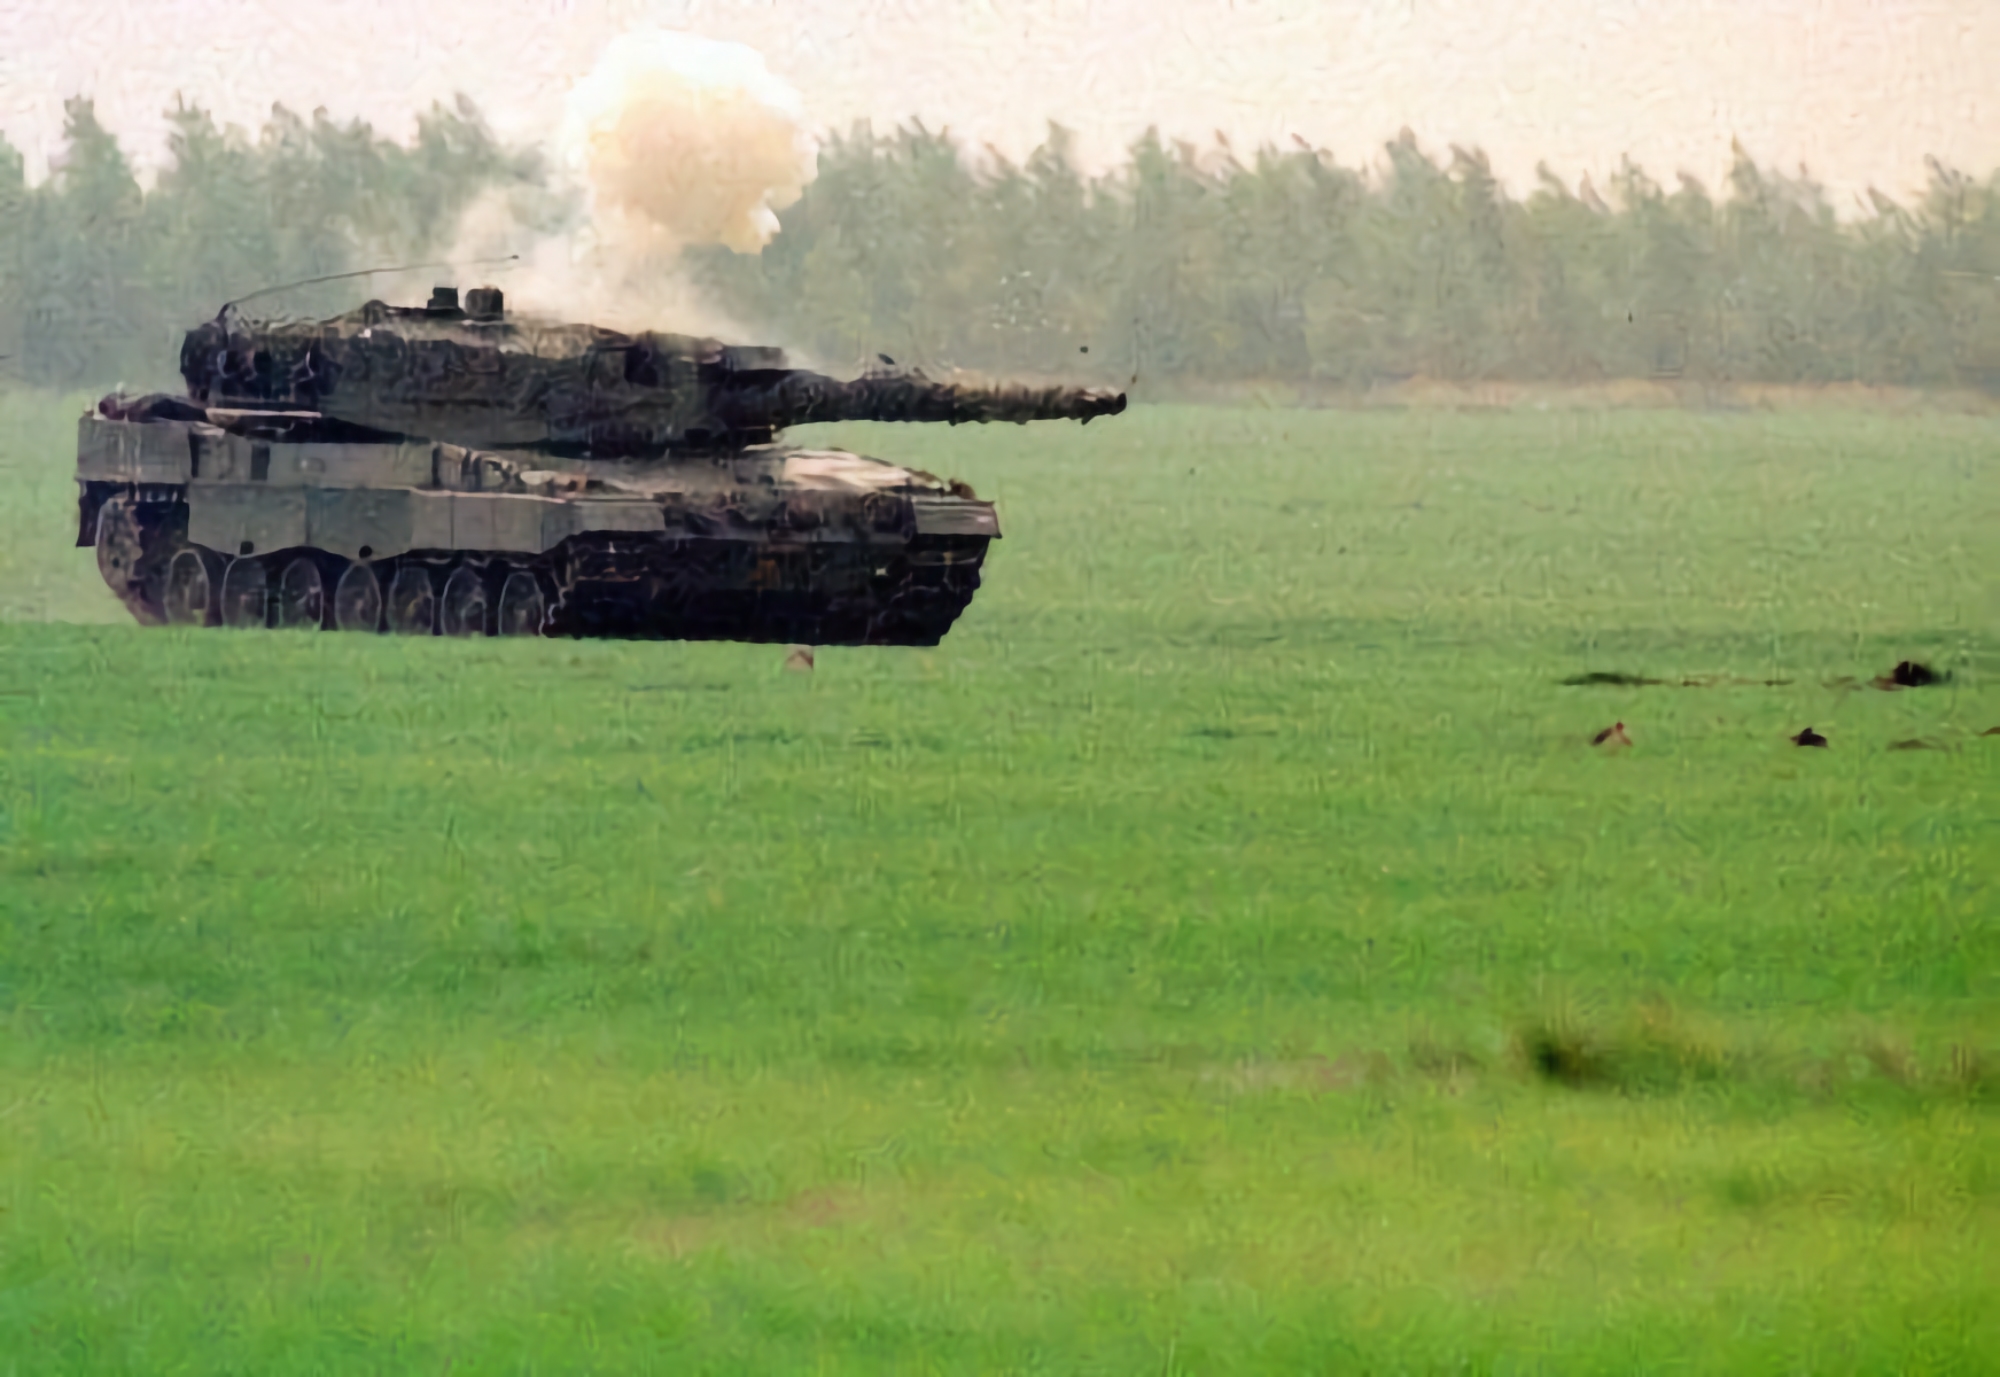 Not just Leopard 1: Netherlands and Denmark to give Ukraine 14 Leopard 2A4 tanks